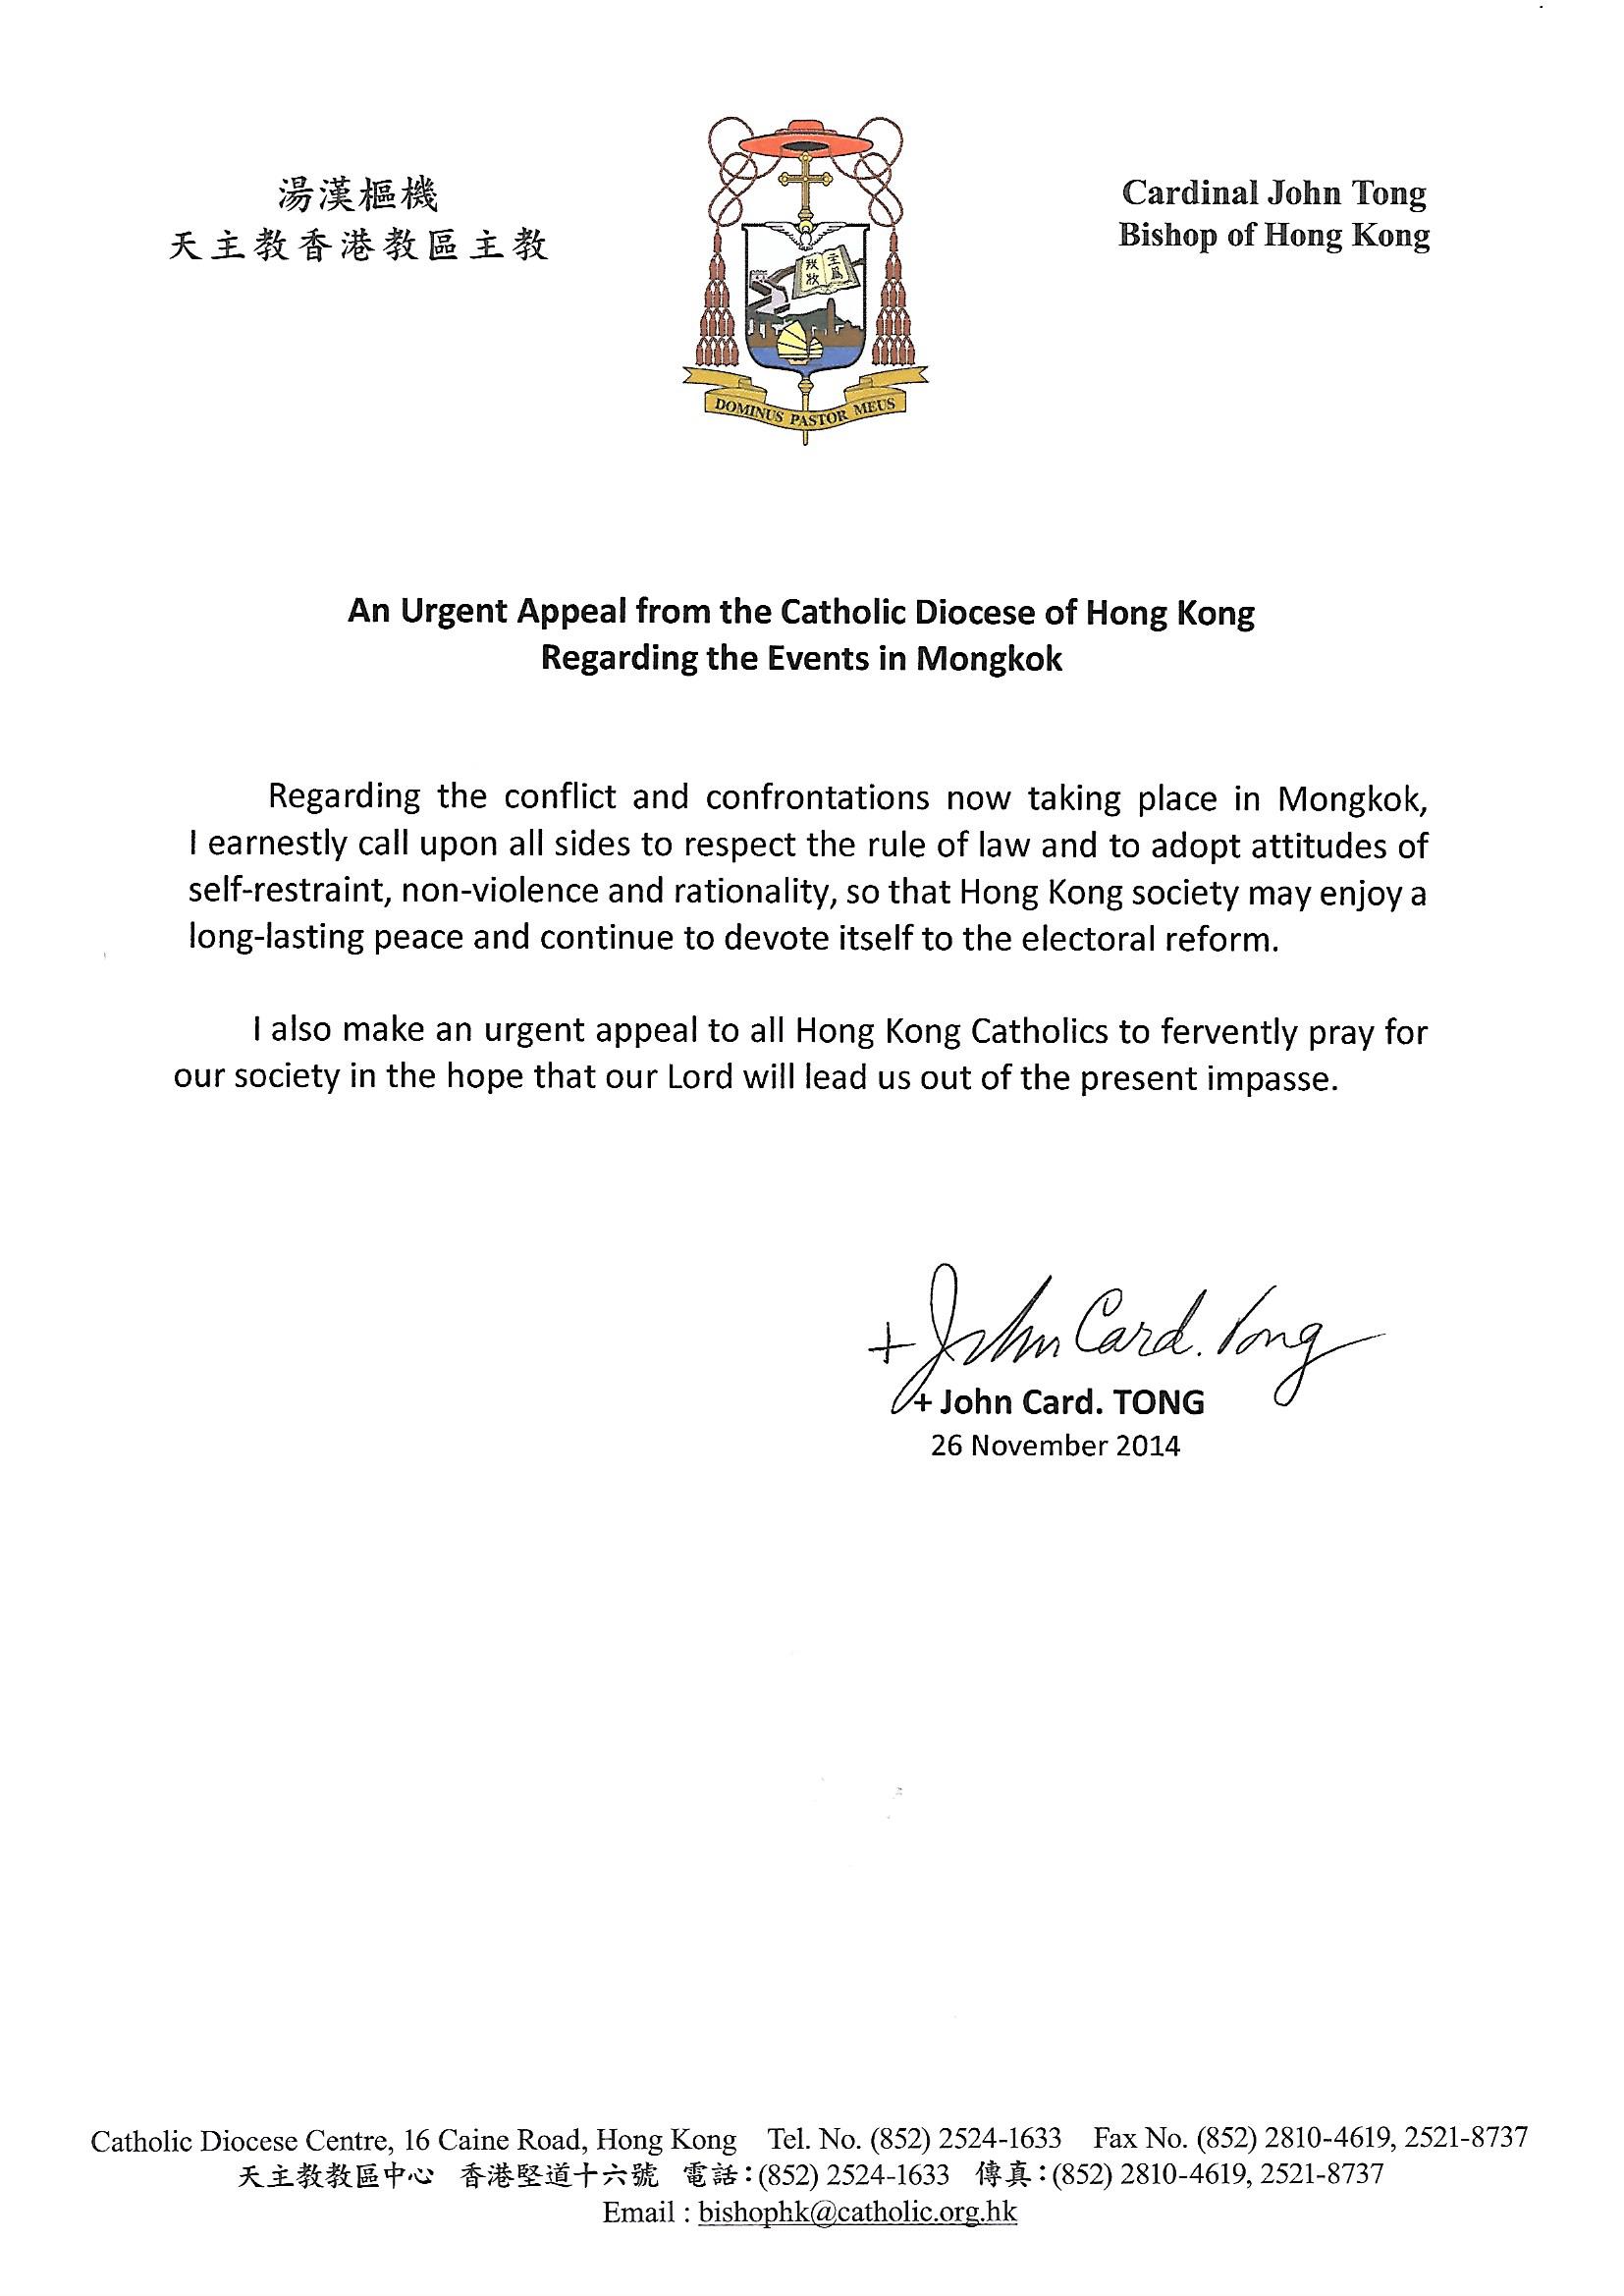 letter-from-cardinal-john-tong_Page_2